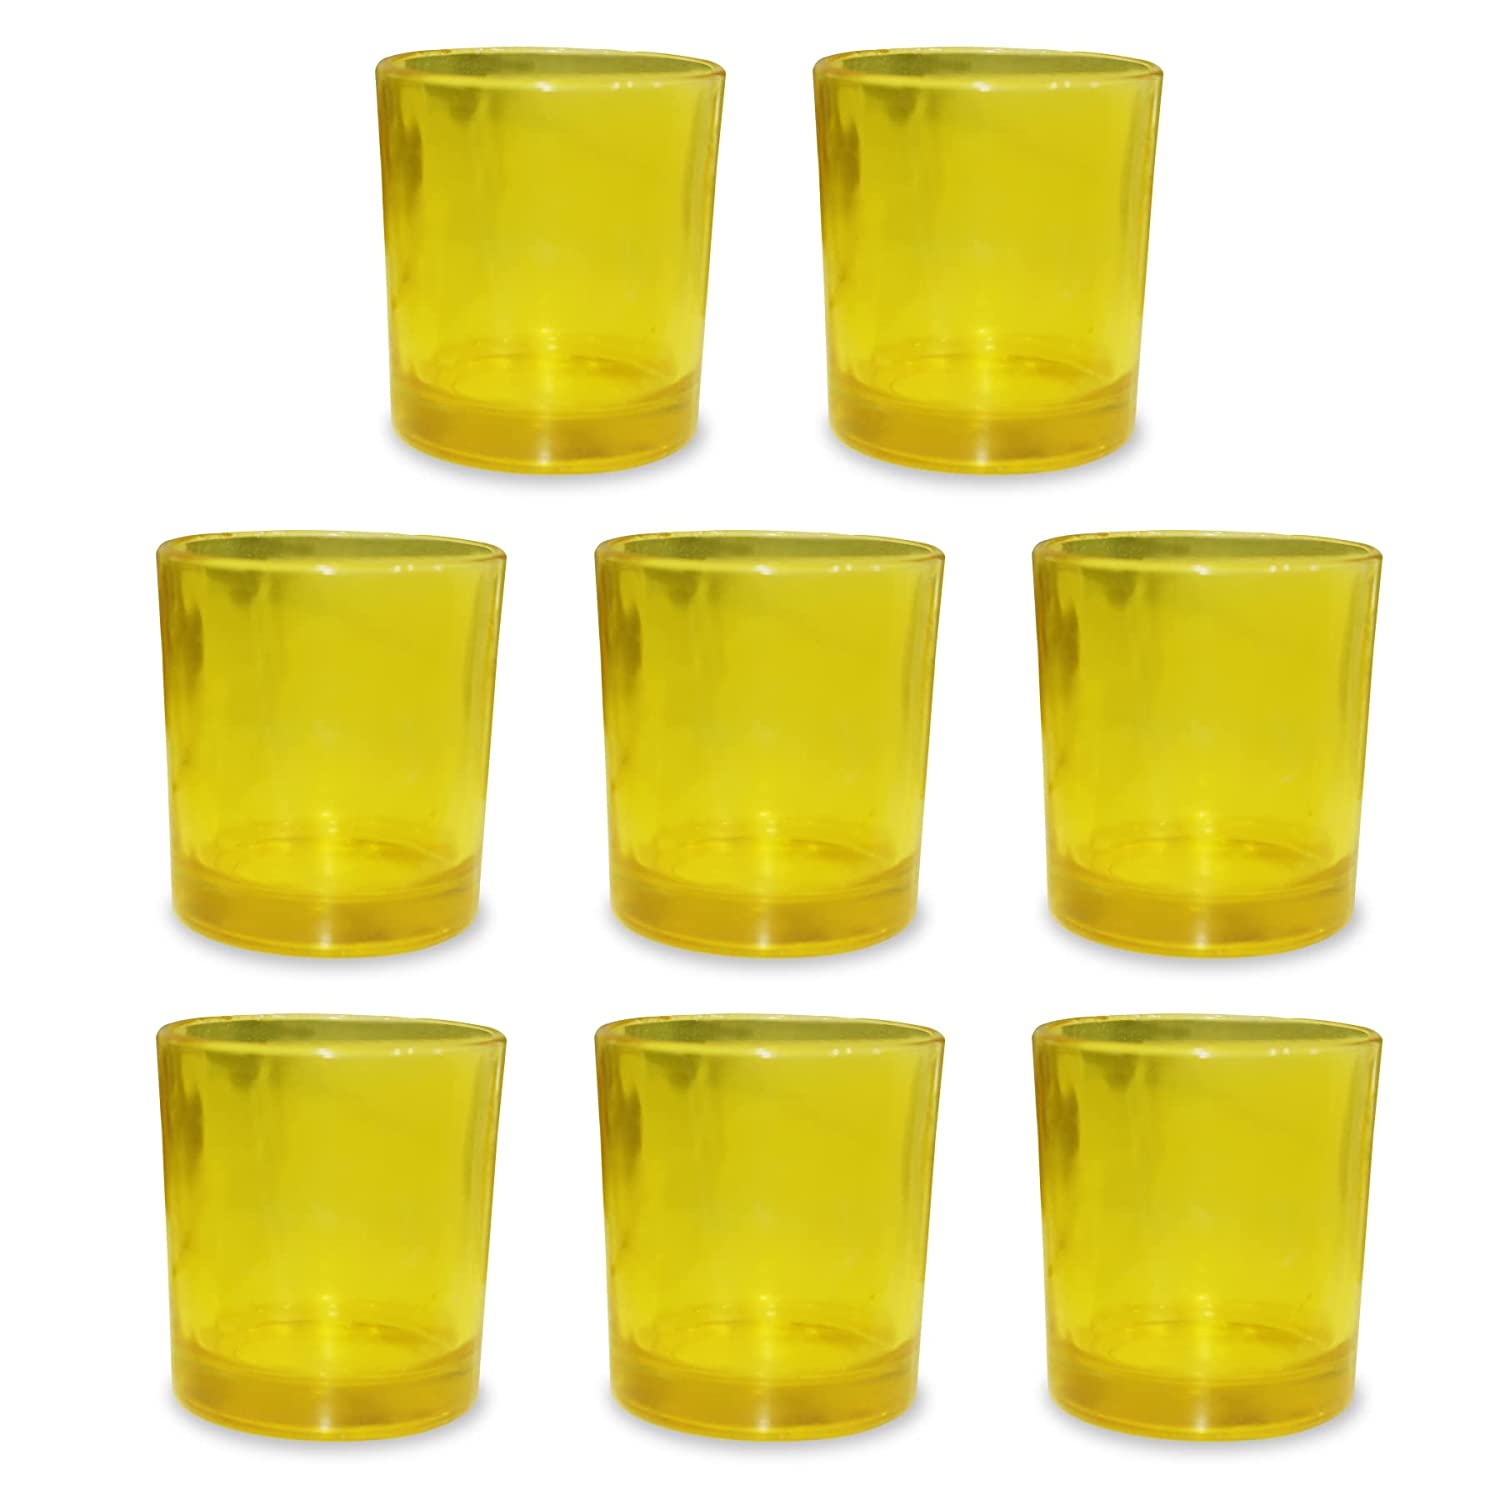 Shoprythm Packaging,Cosmetic Jar Pack of 8 Yellow Glass Candle Jar